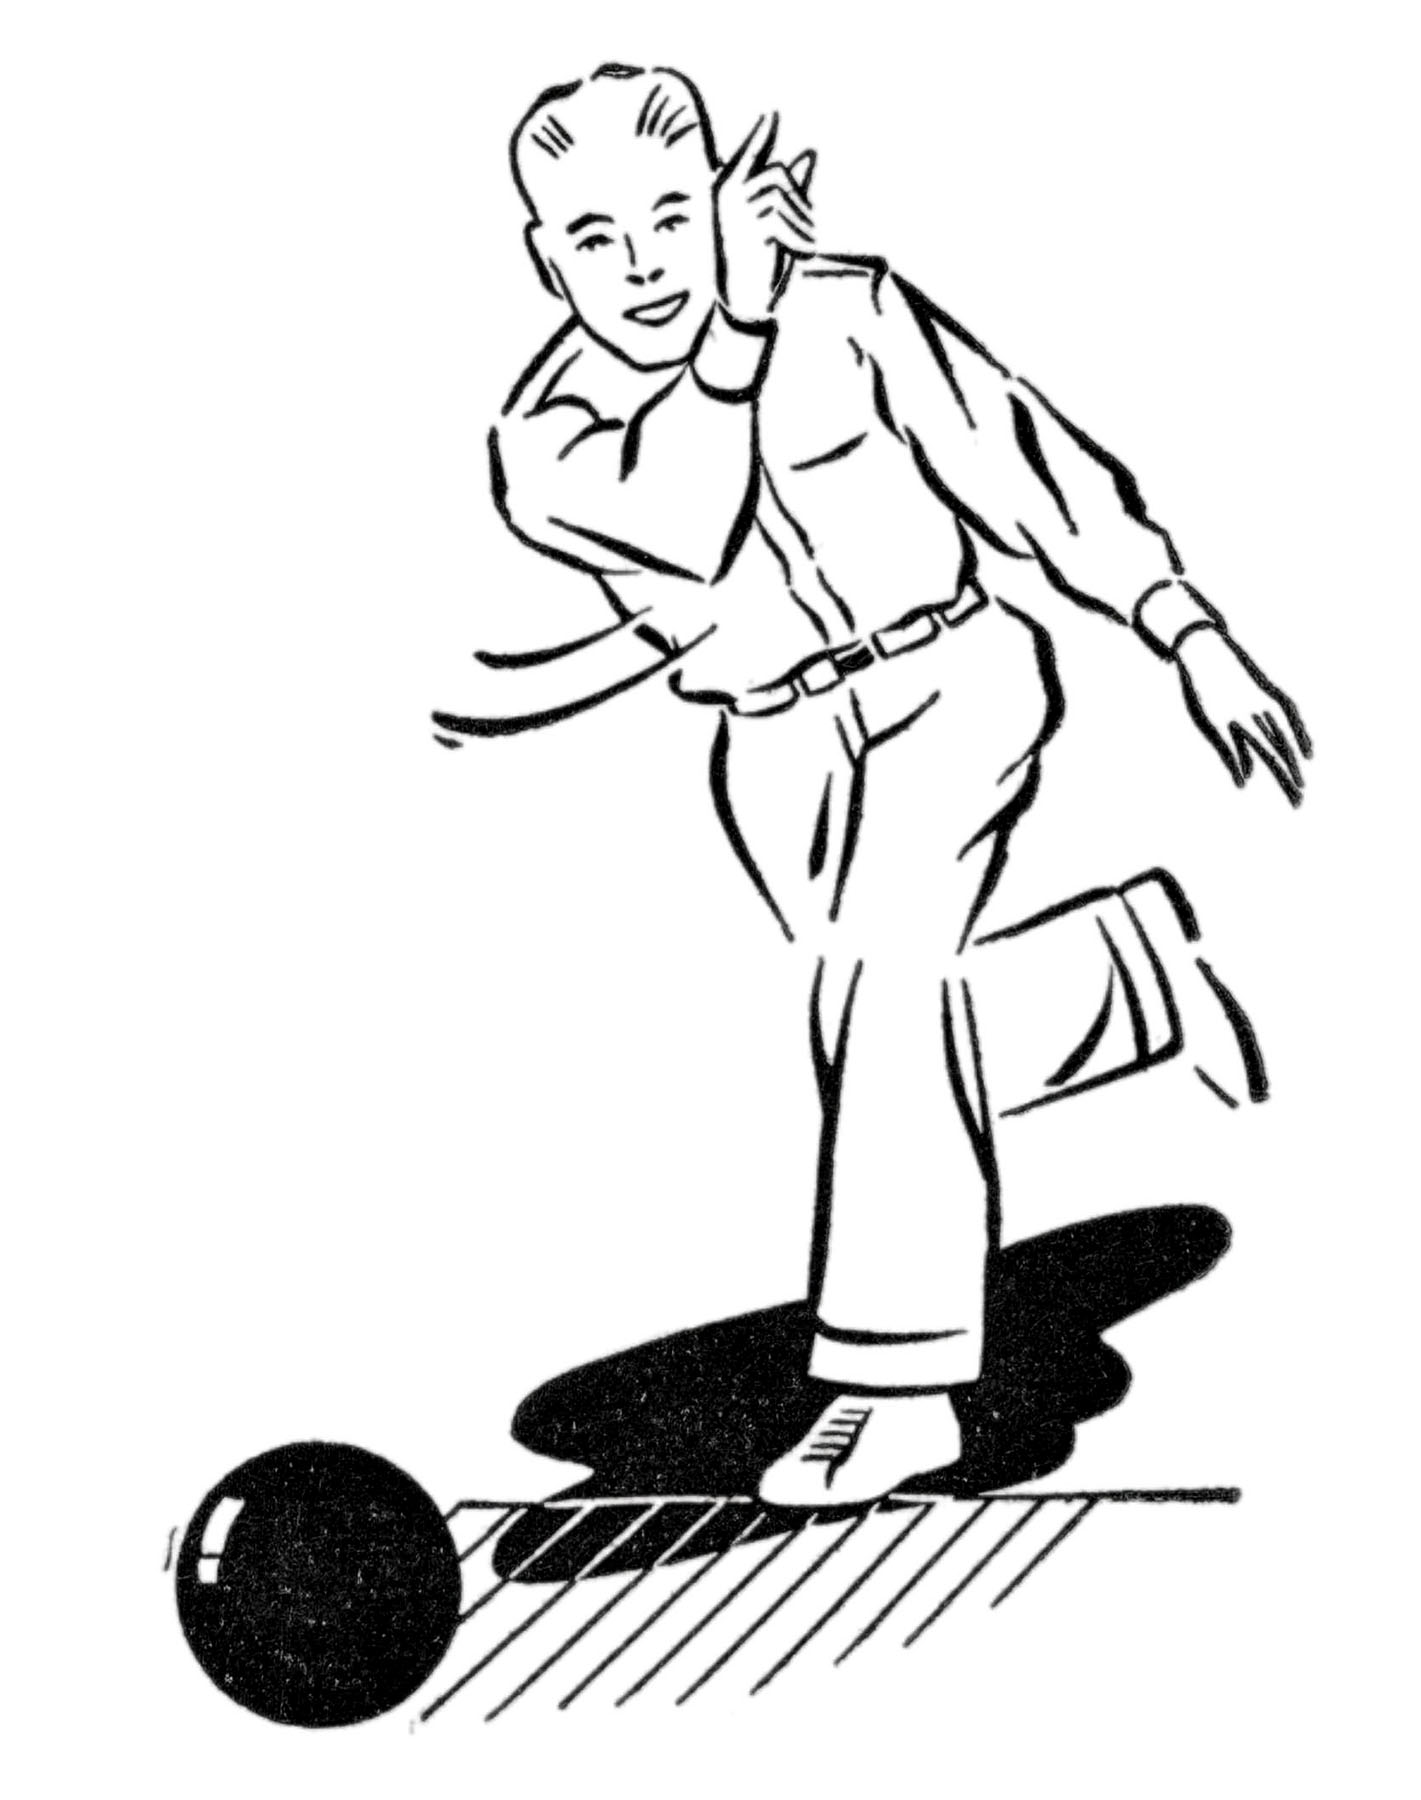 Bowling Ball with man image